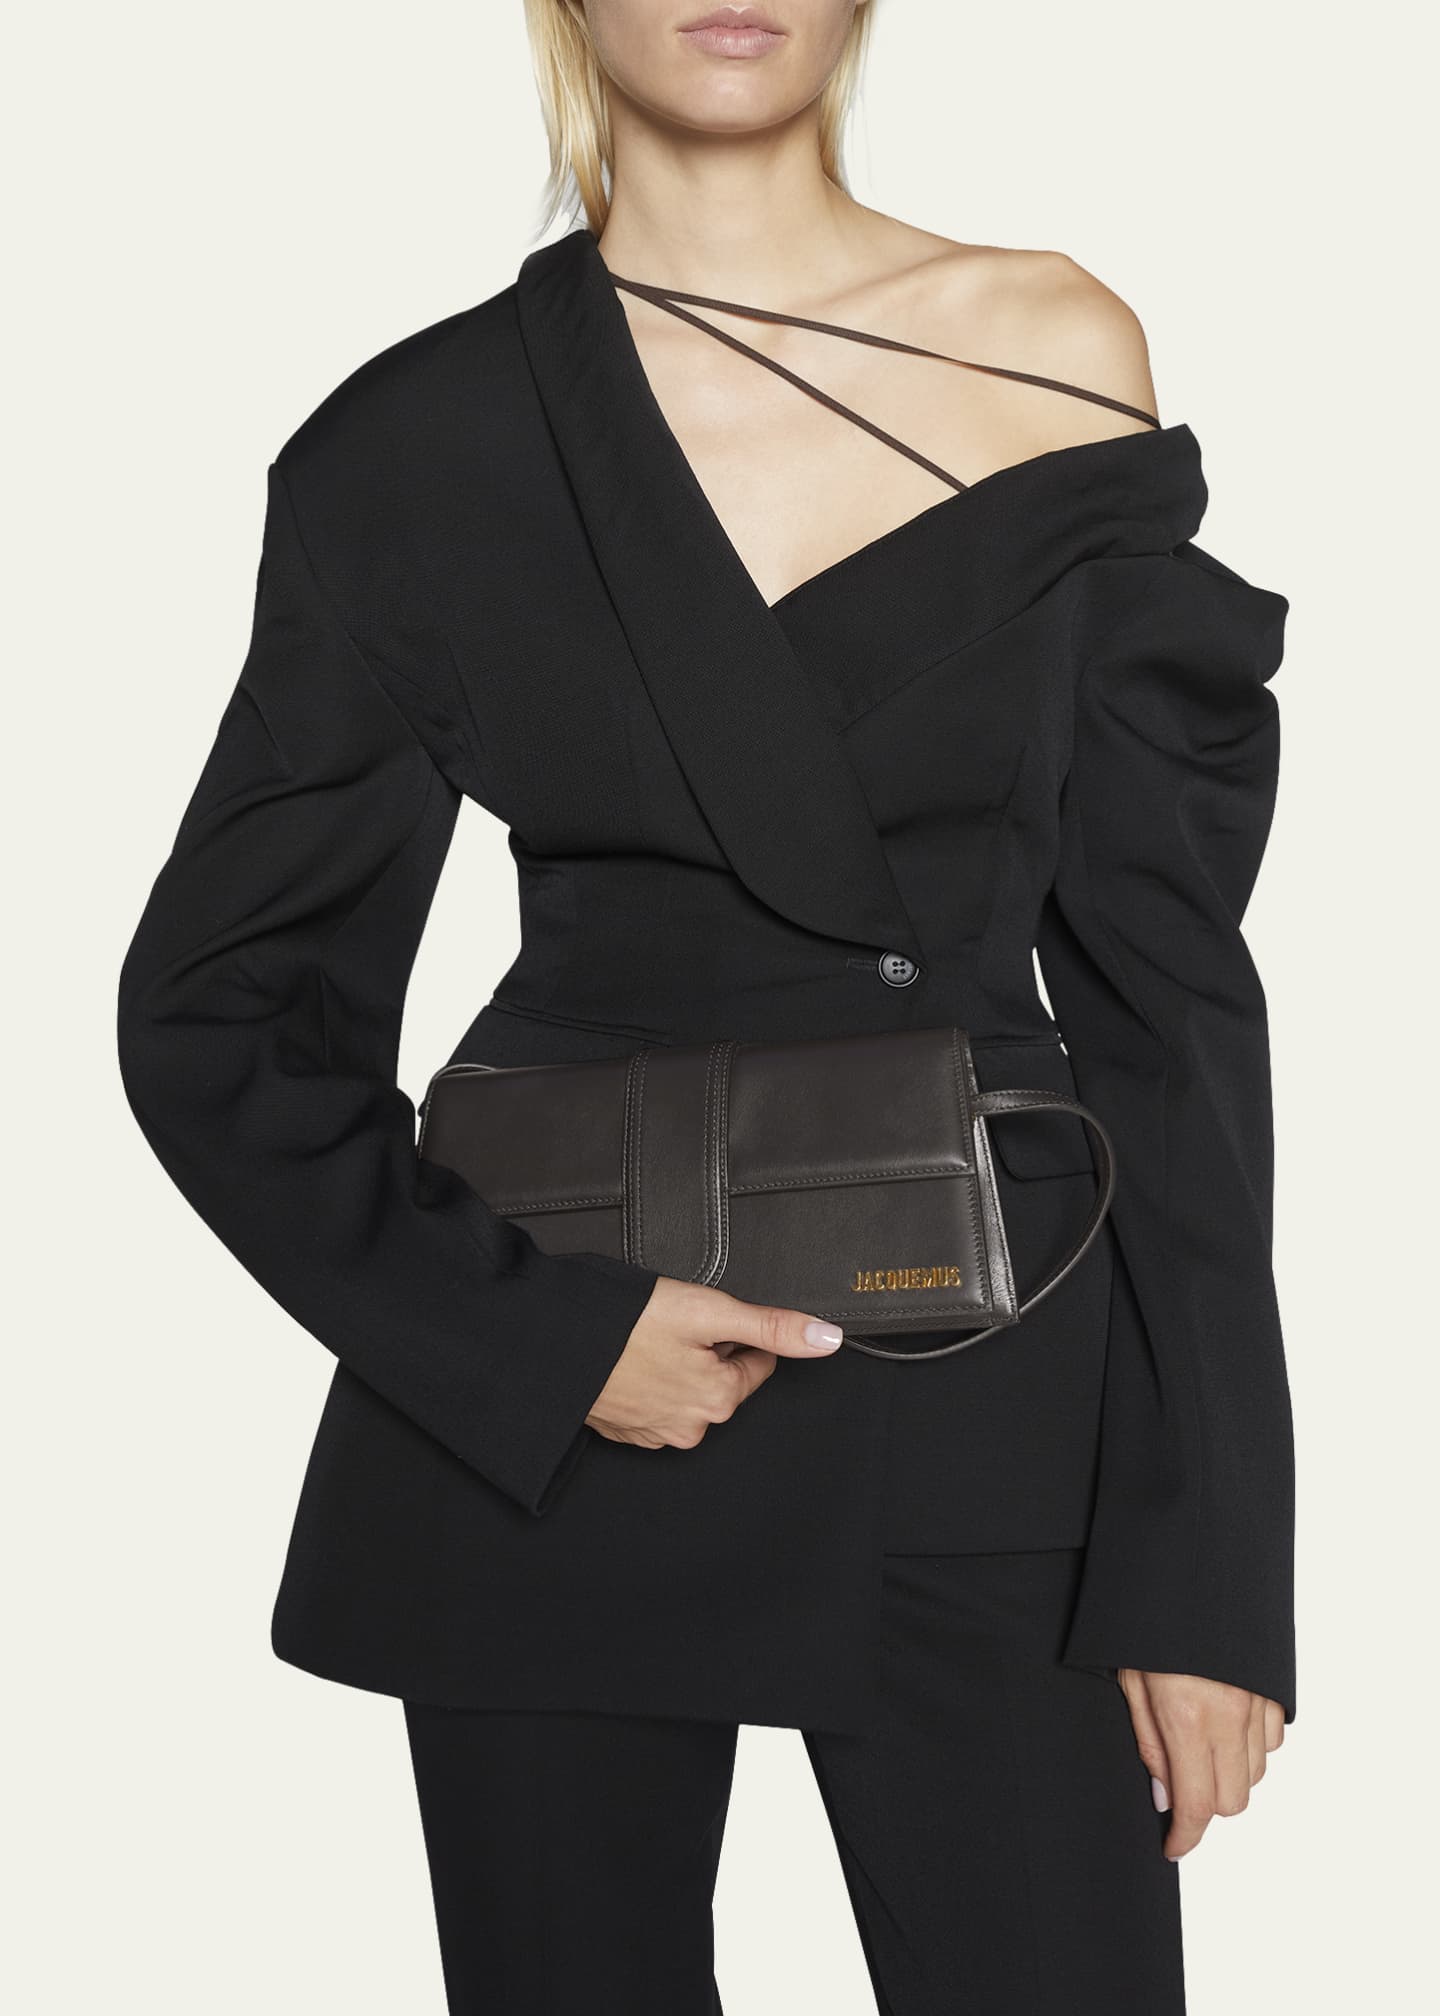 Le Bambino Leather Shoulder Bag in Black - Jacquemus